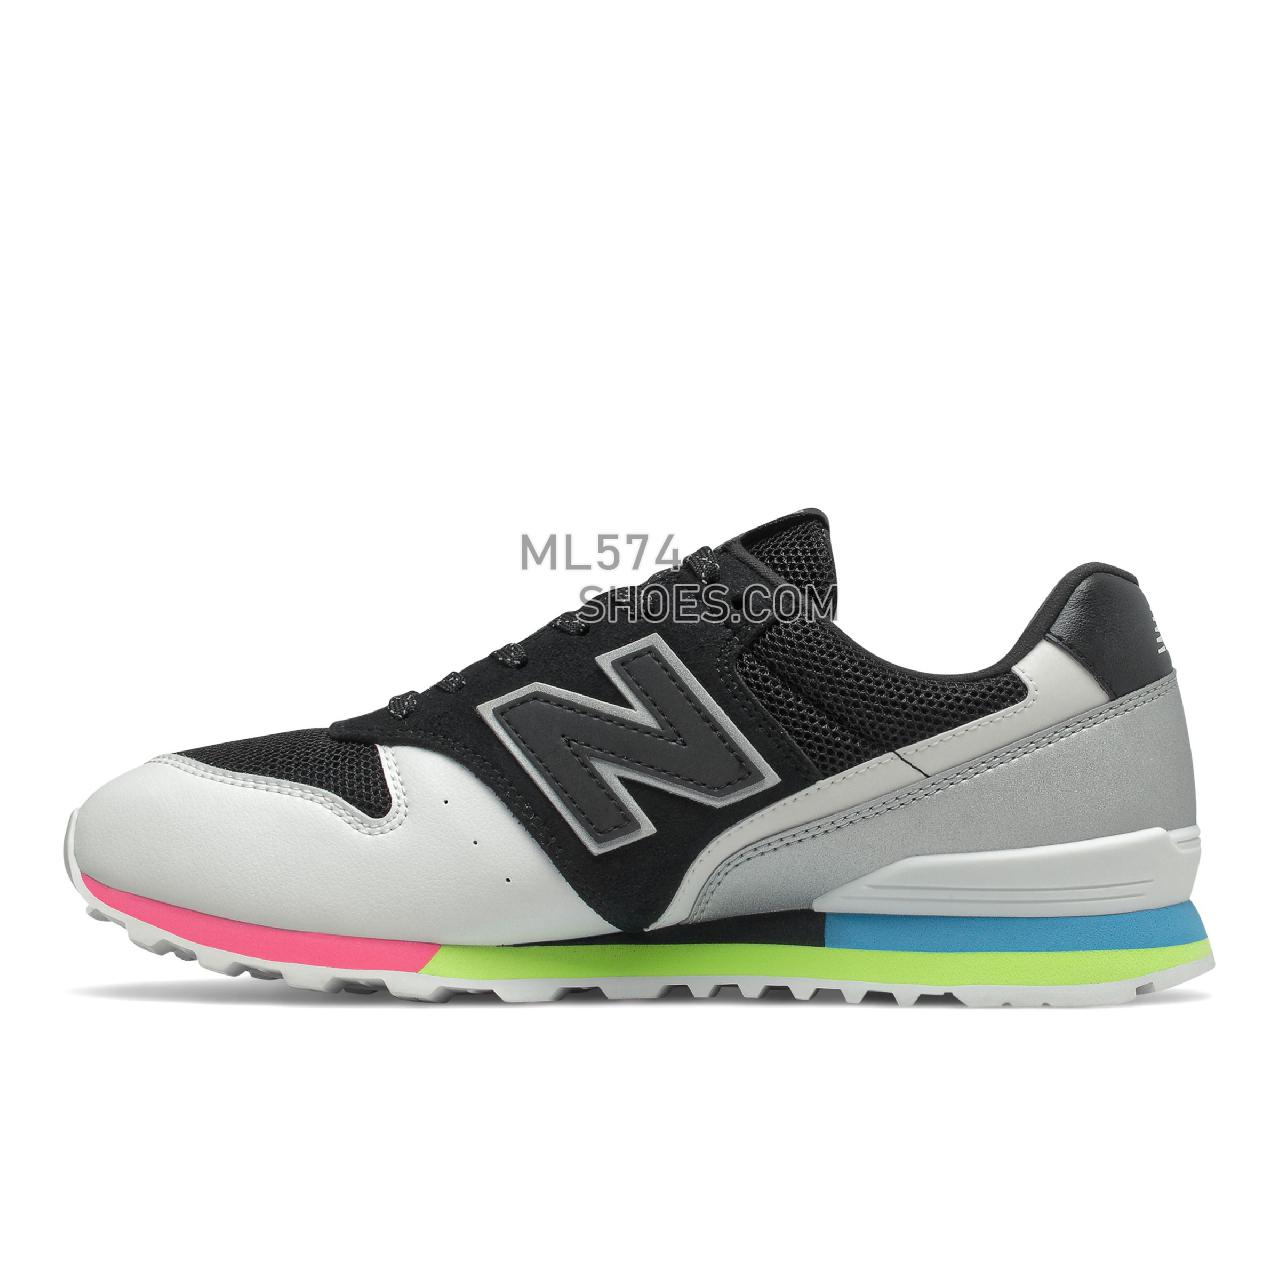 New Balance WL996v2 - Women's Classic Sneakers - Black with White - WL996PR2